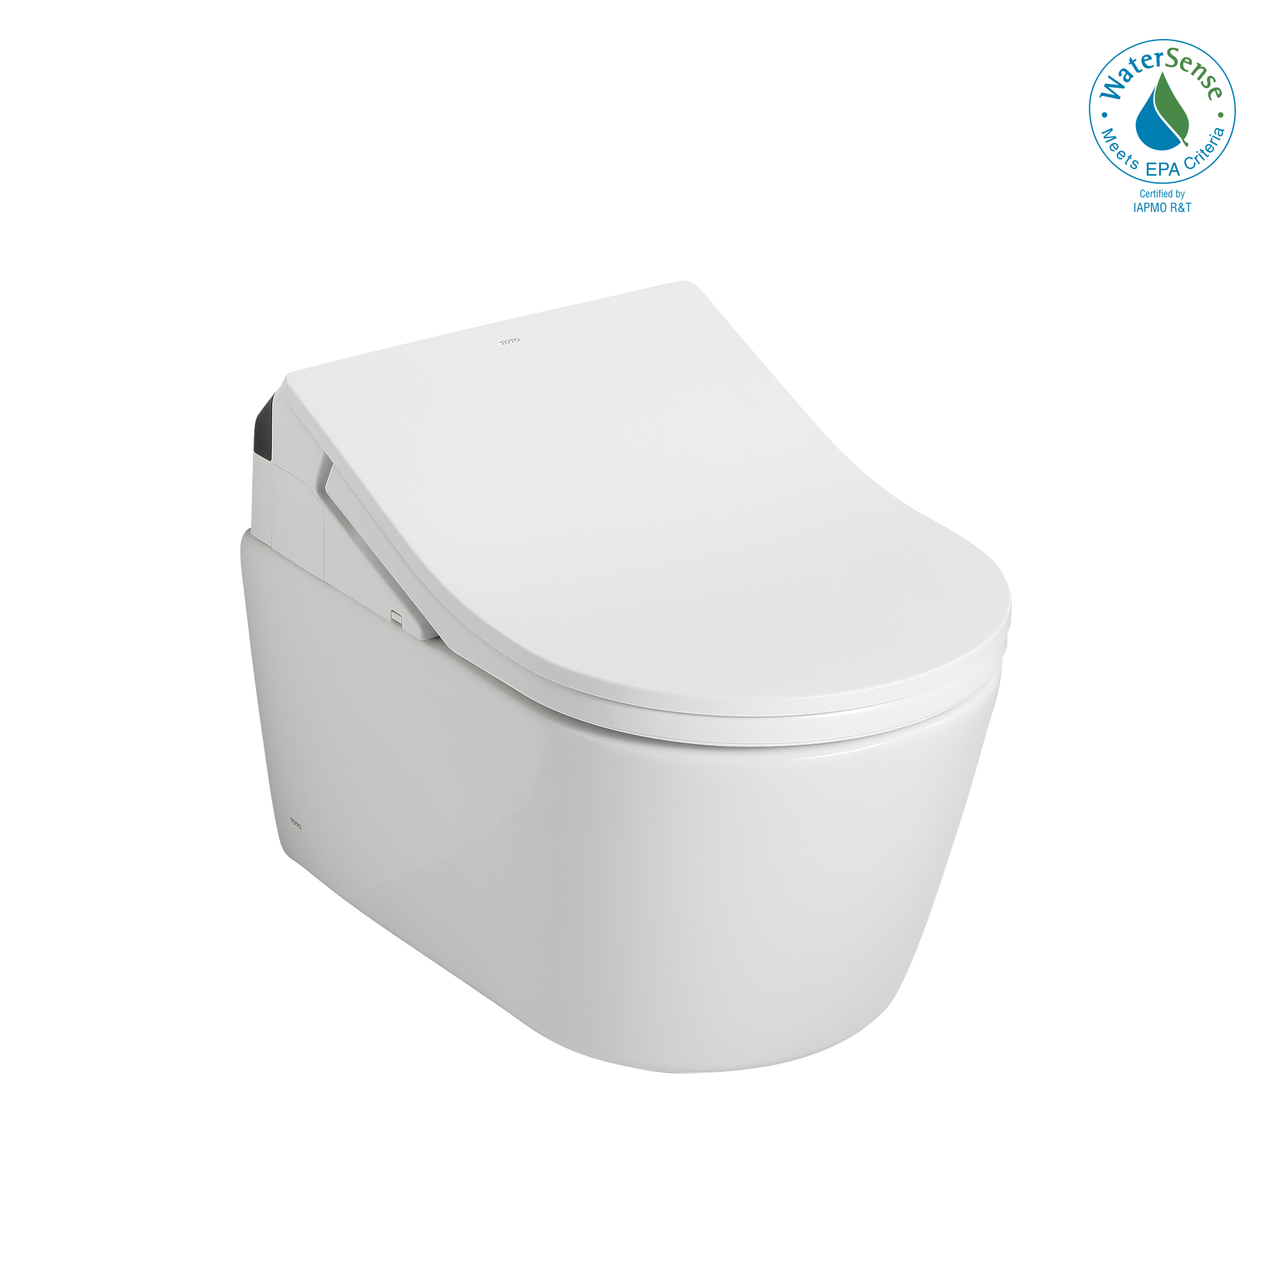 TOTO WASHLET+ RP Wall-Hung D-Shape Toilet with RX Bidet Seat and DuoFit In-Wall 1.28 and 0.9 GPF Auto Dual-Flush Tank System, Matte Silver - CWT447247CMFGA#MS - BNGBath